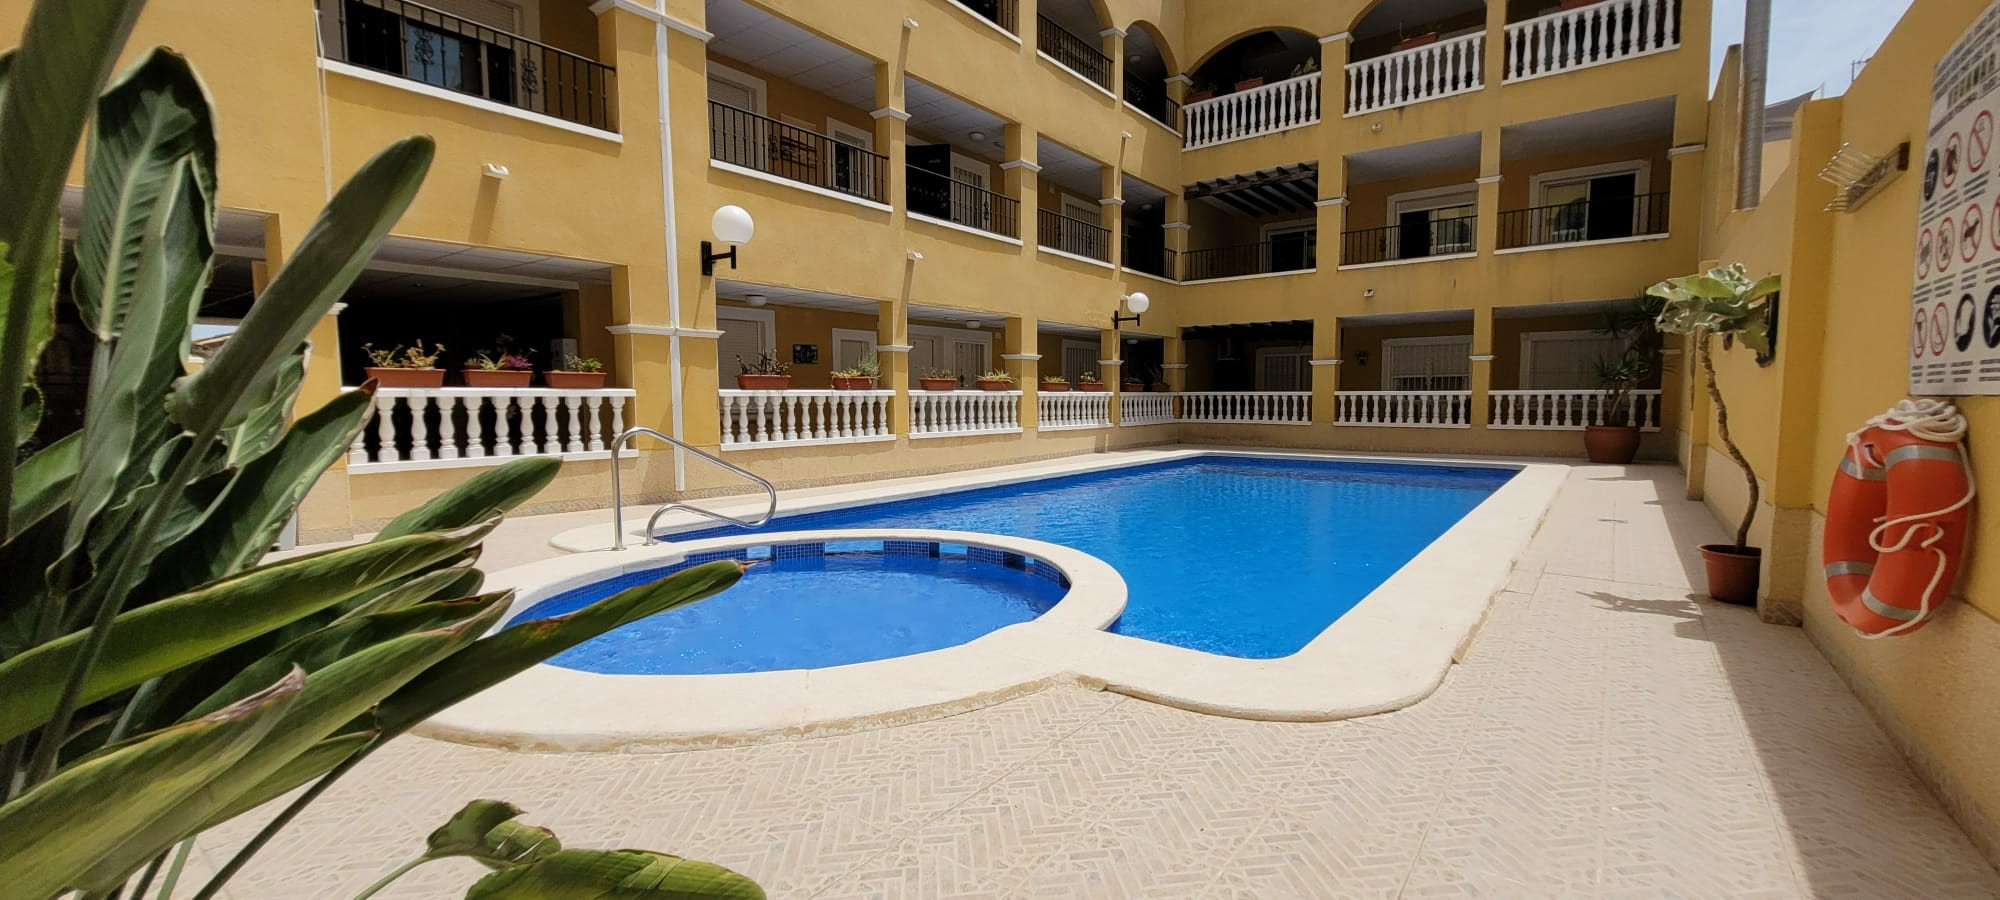 For sale: 2 bedroom apartment / flat in Rafal